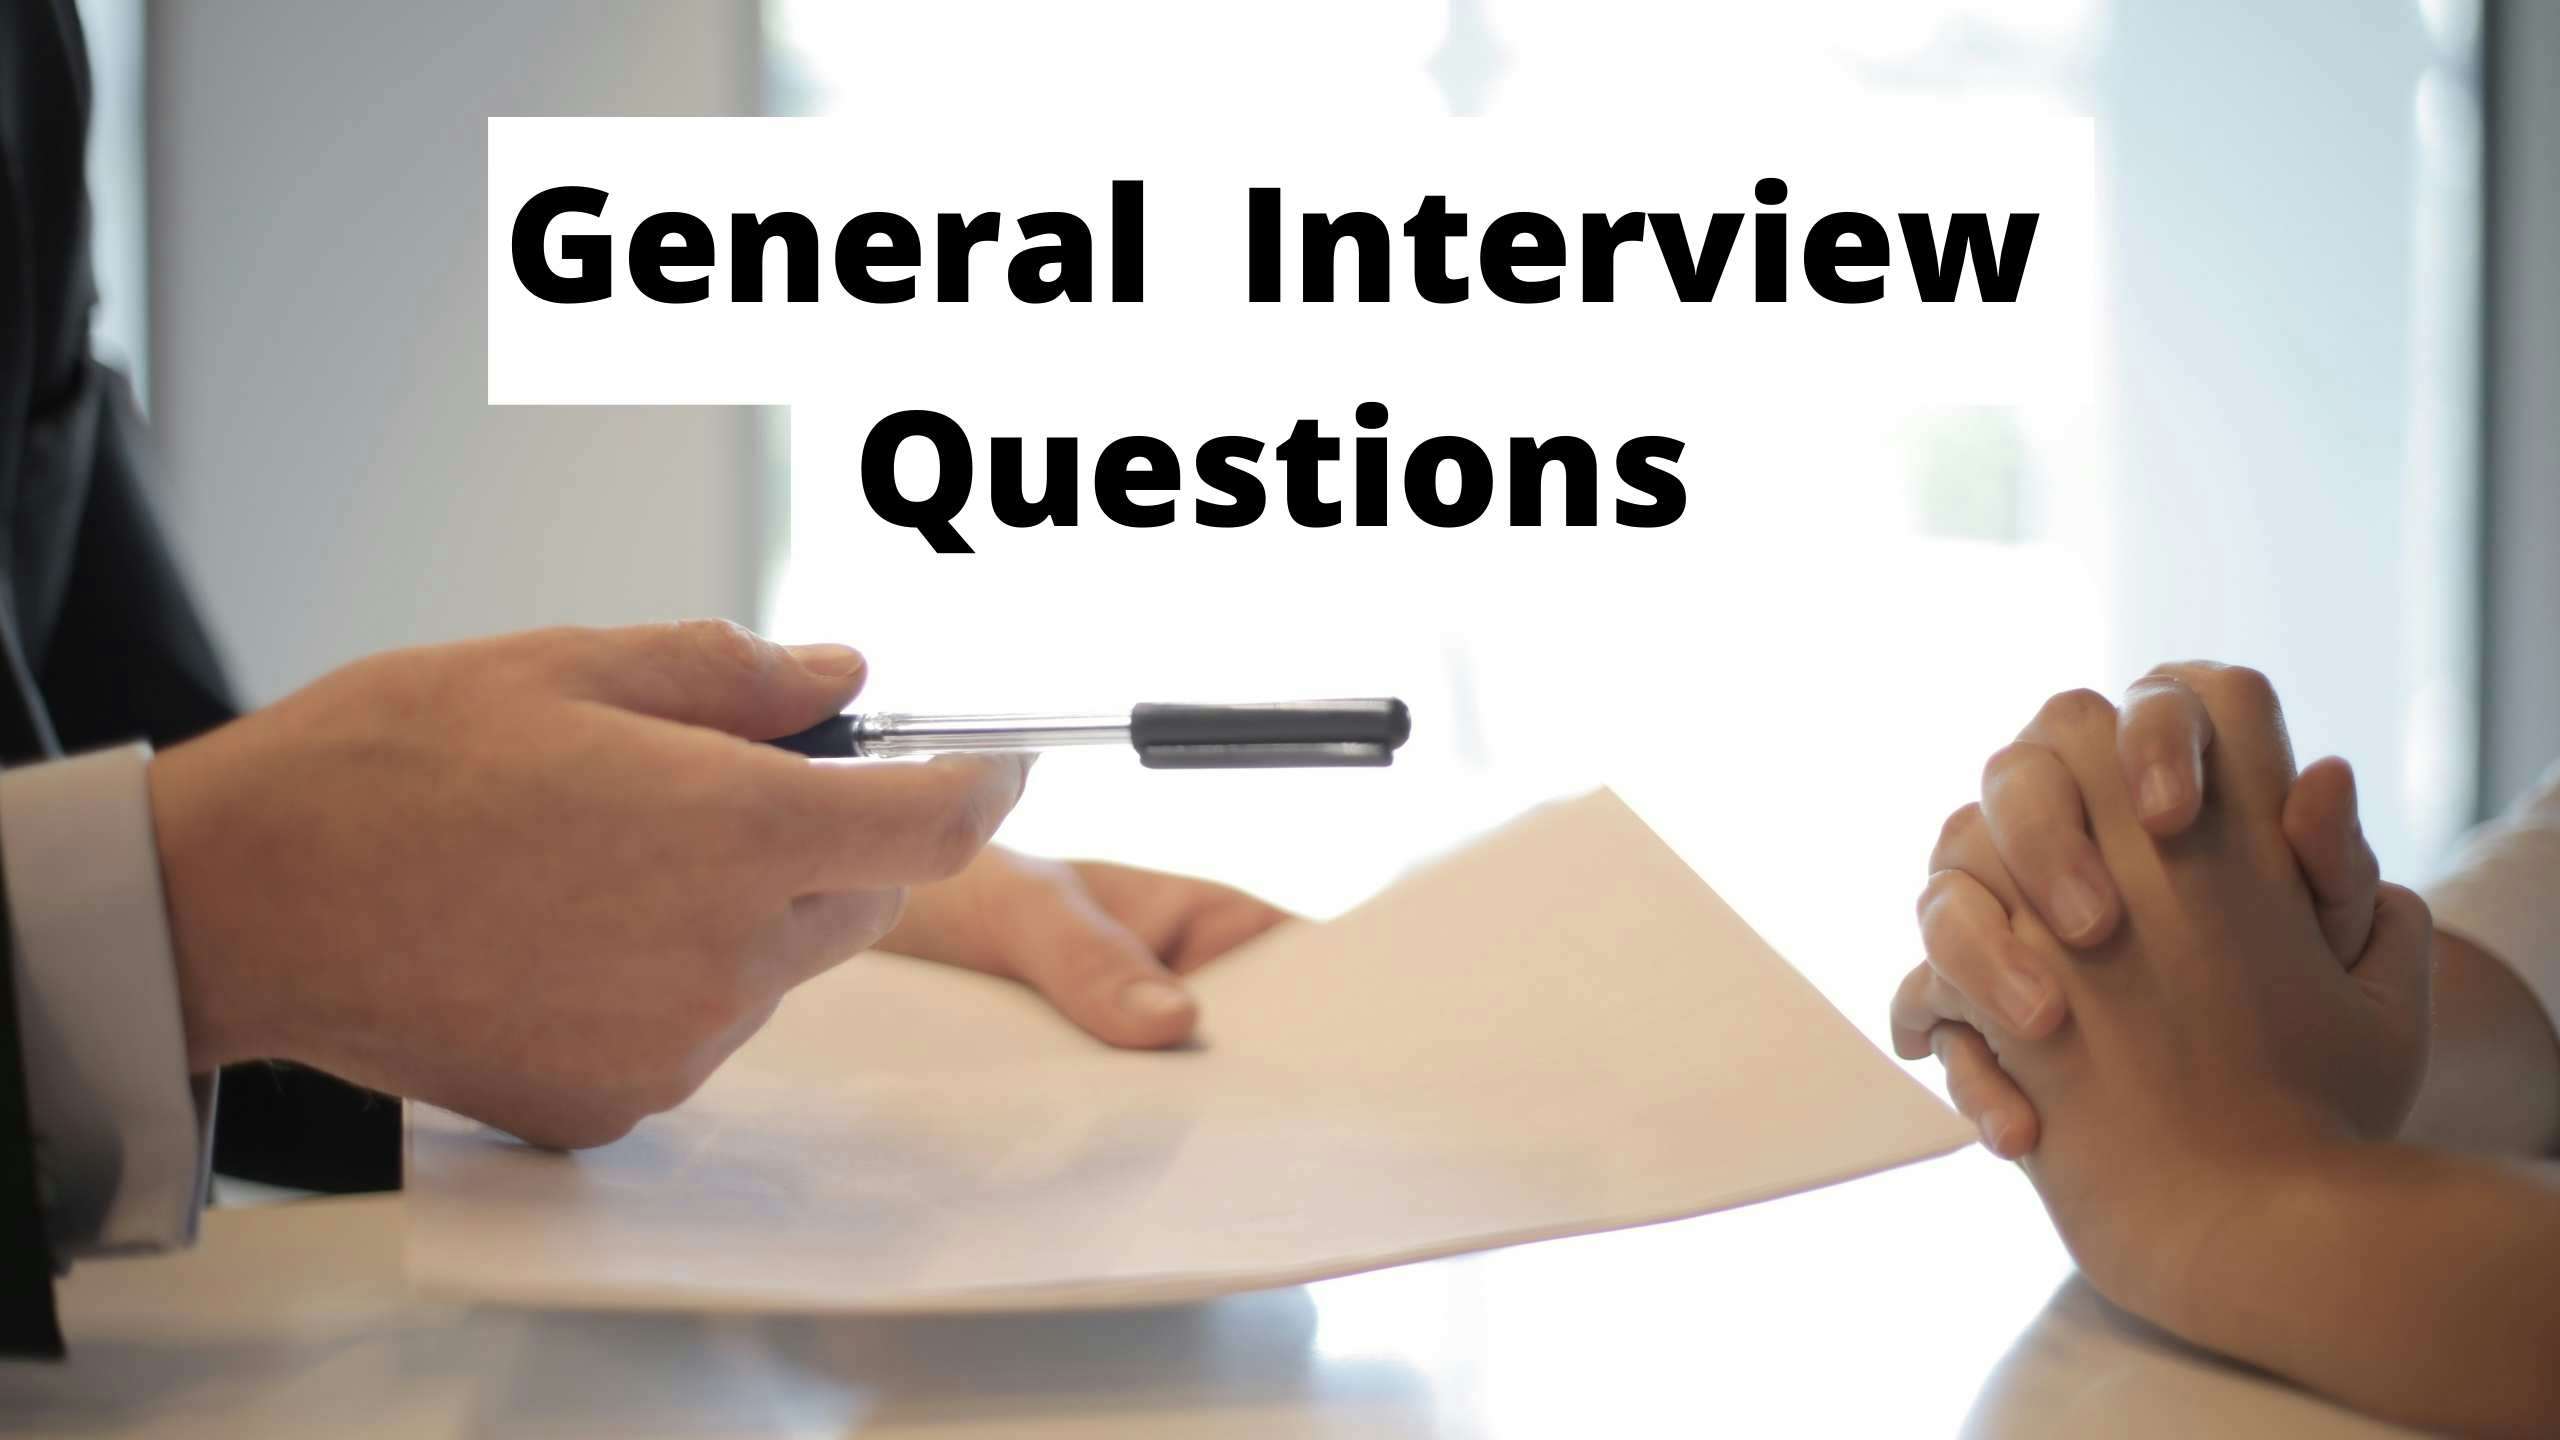 7 General Interview Questions and their Answers for Tech Jobs - Thumbnail